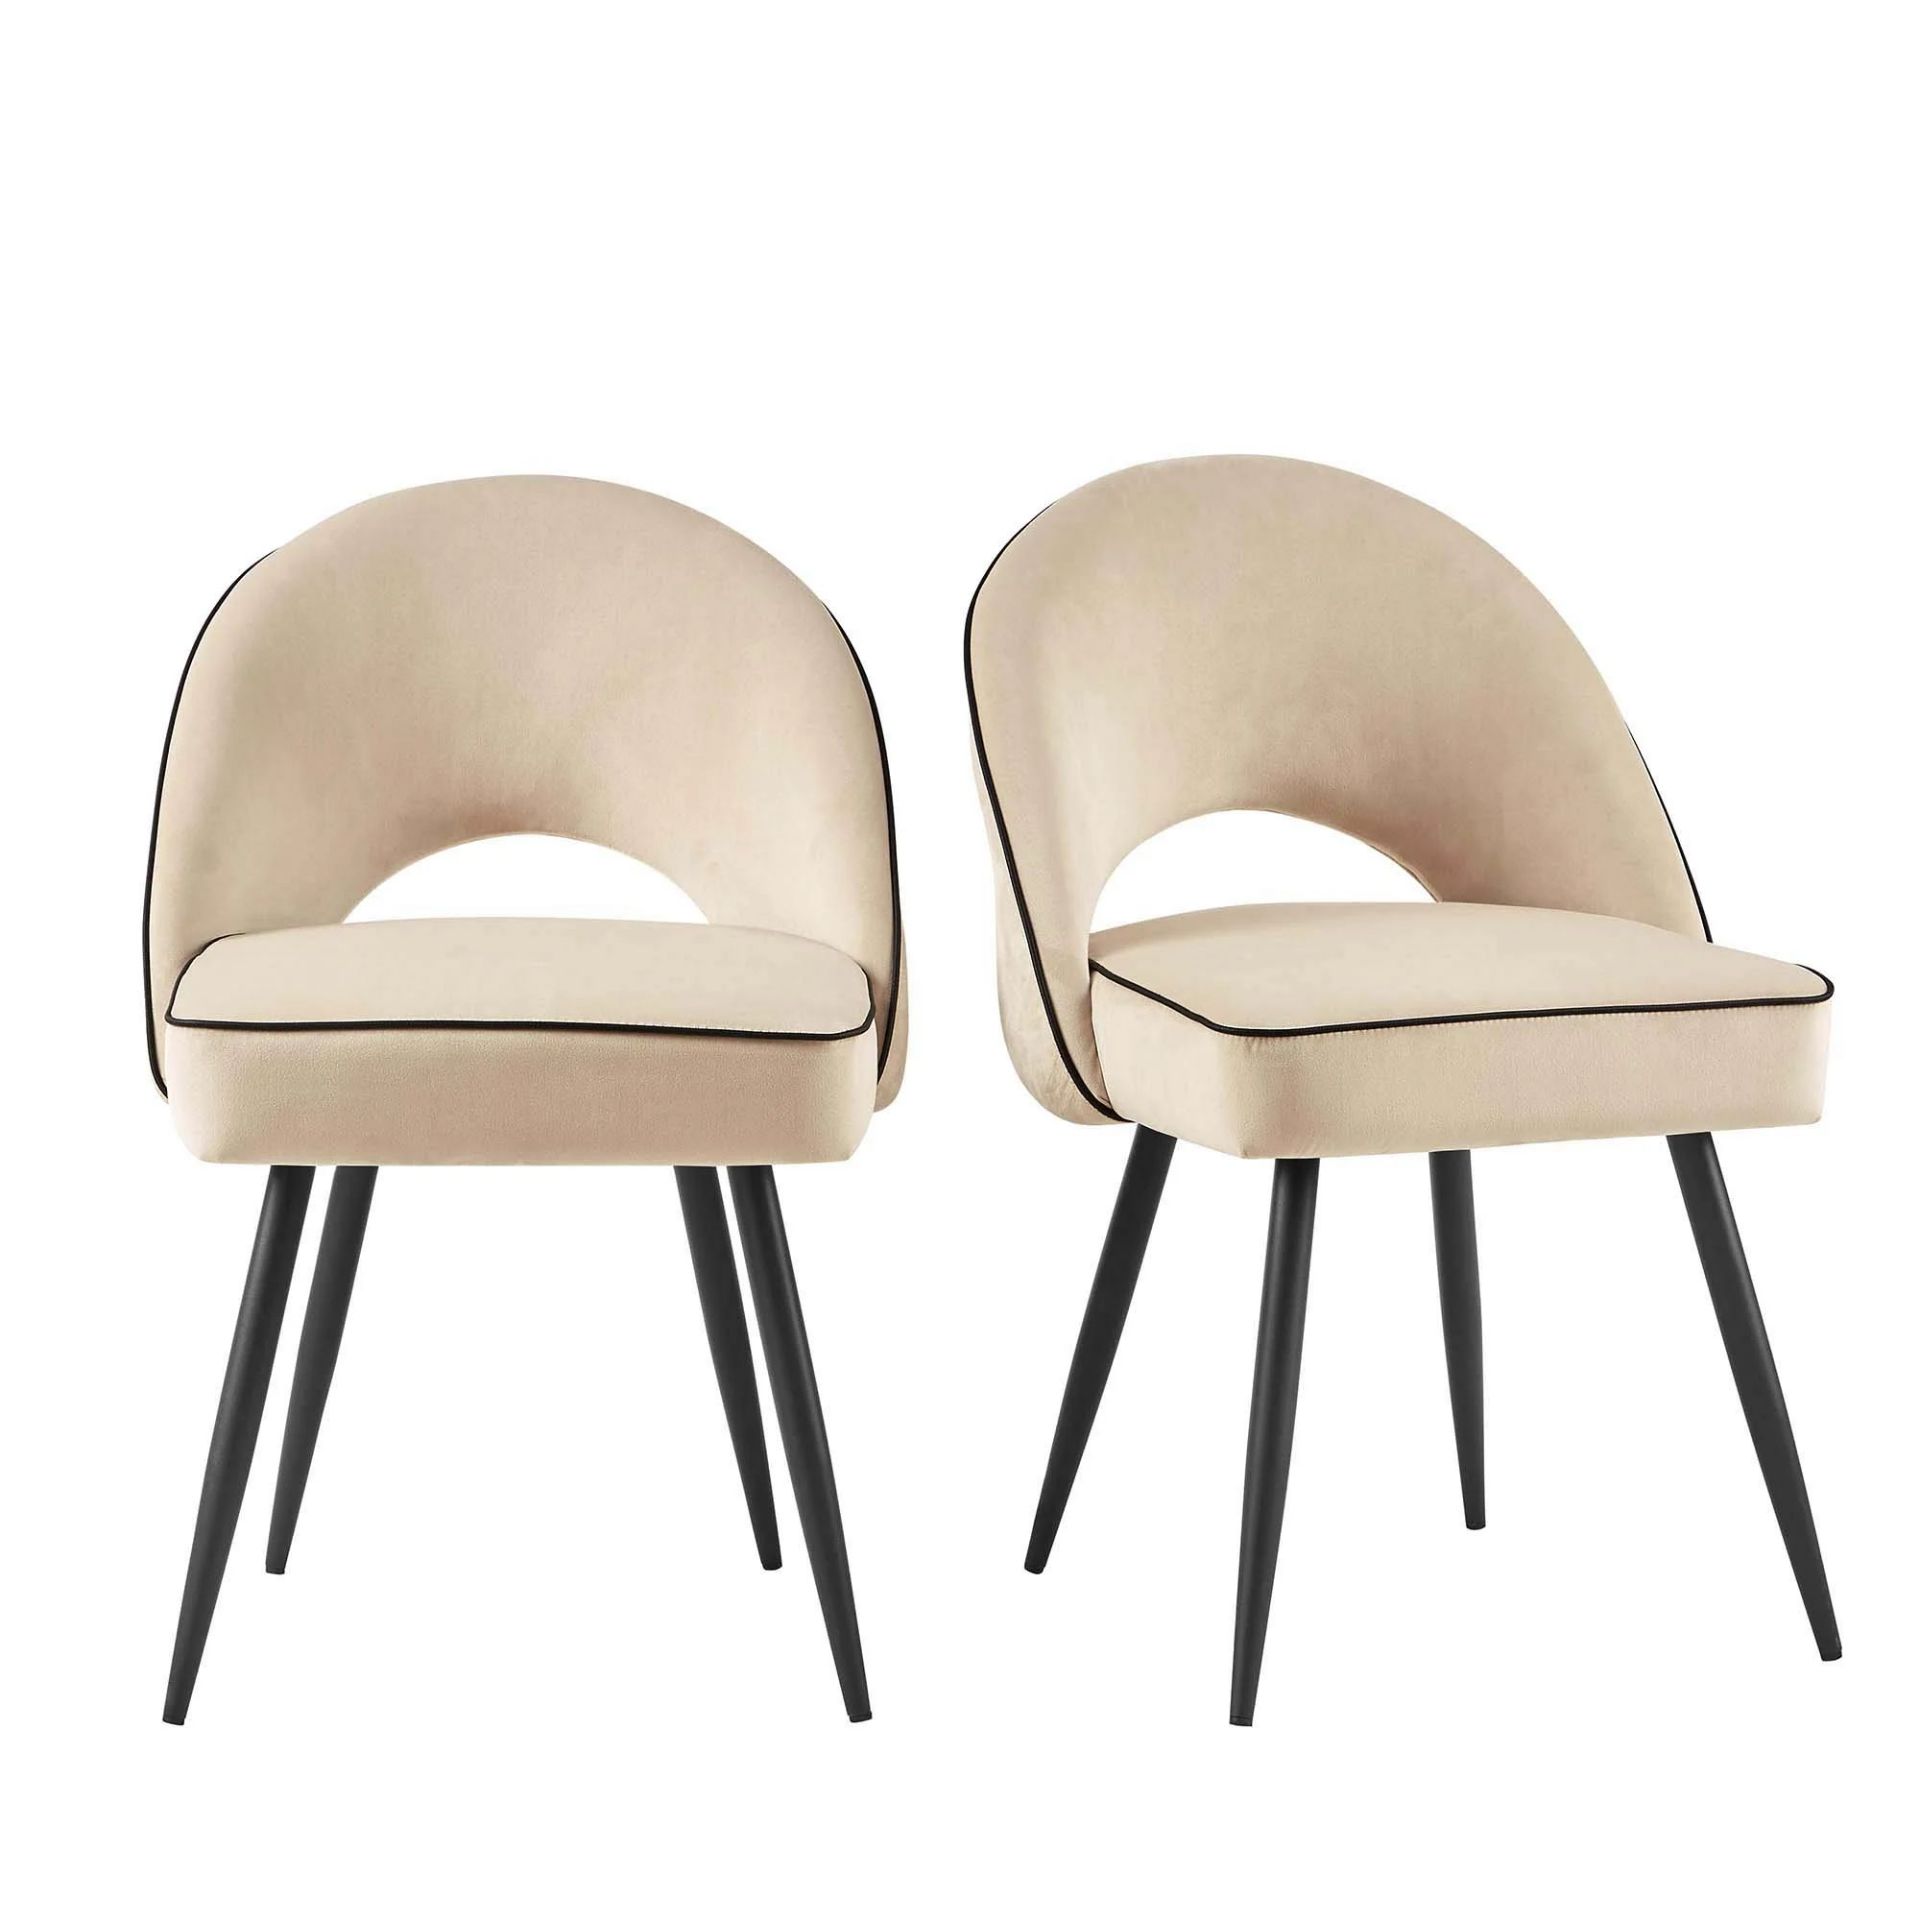 Oakley Set of 2 Champagne Velvet Upholstered Dining Chairs with Contrast Piping. - ER30. RRP £249. - Image 2 of 2